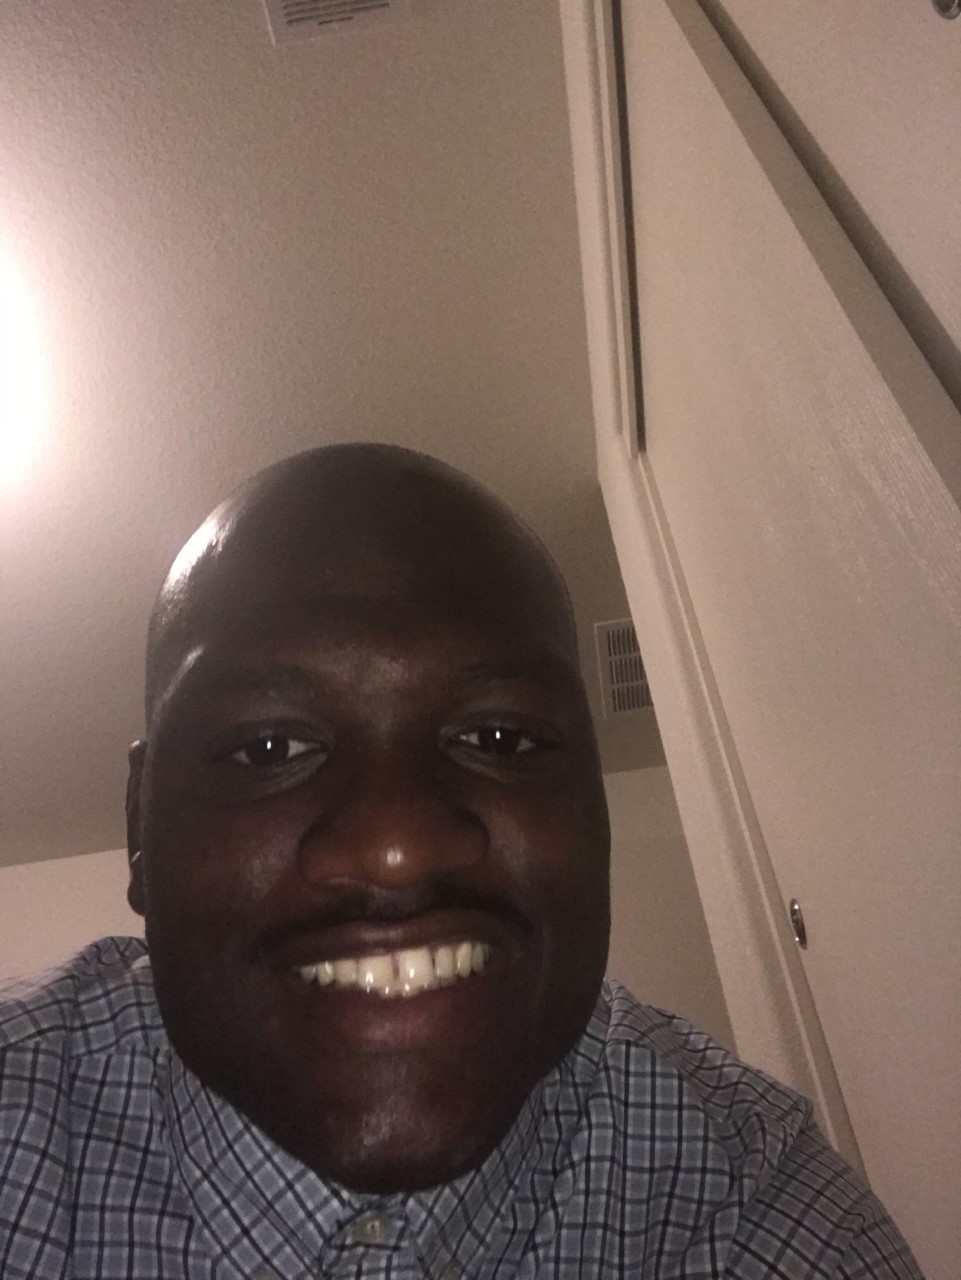 Selfie of Aerius, a Black man with a close cut buzz cut and wearing a button down shirt.